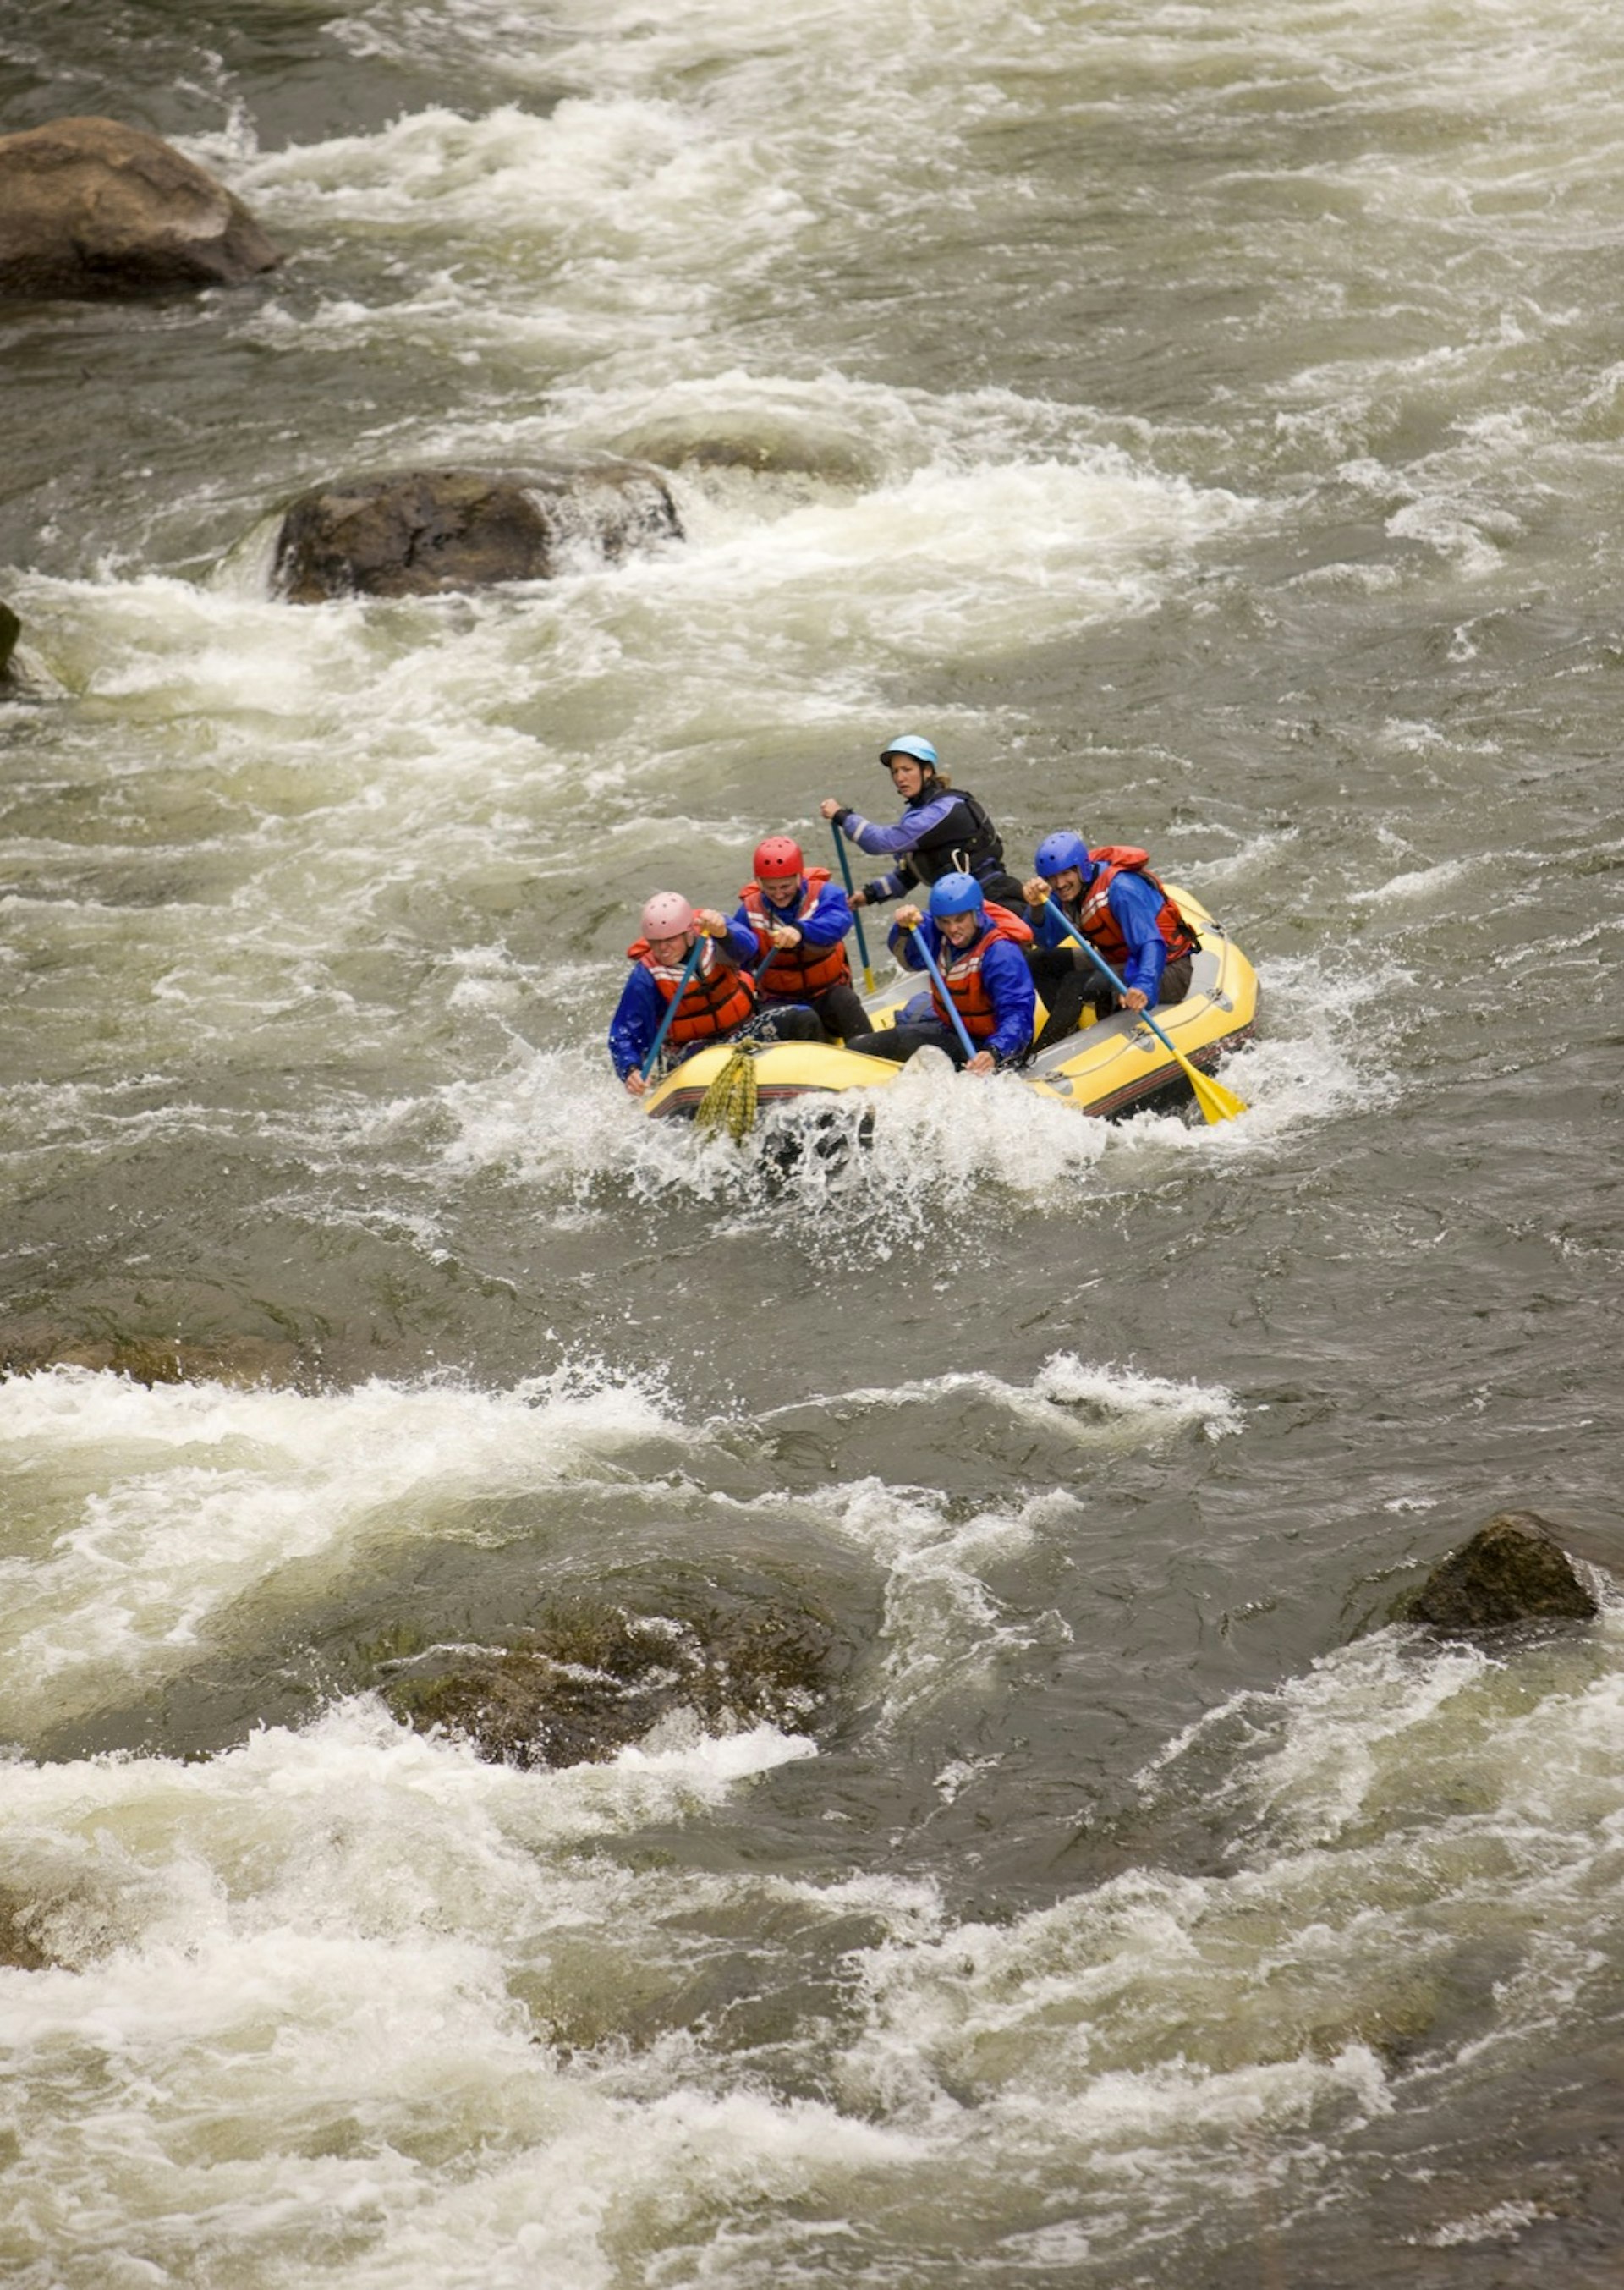 Four people and a guide raft down the Arkansas River in Colorado.